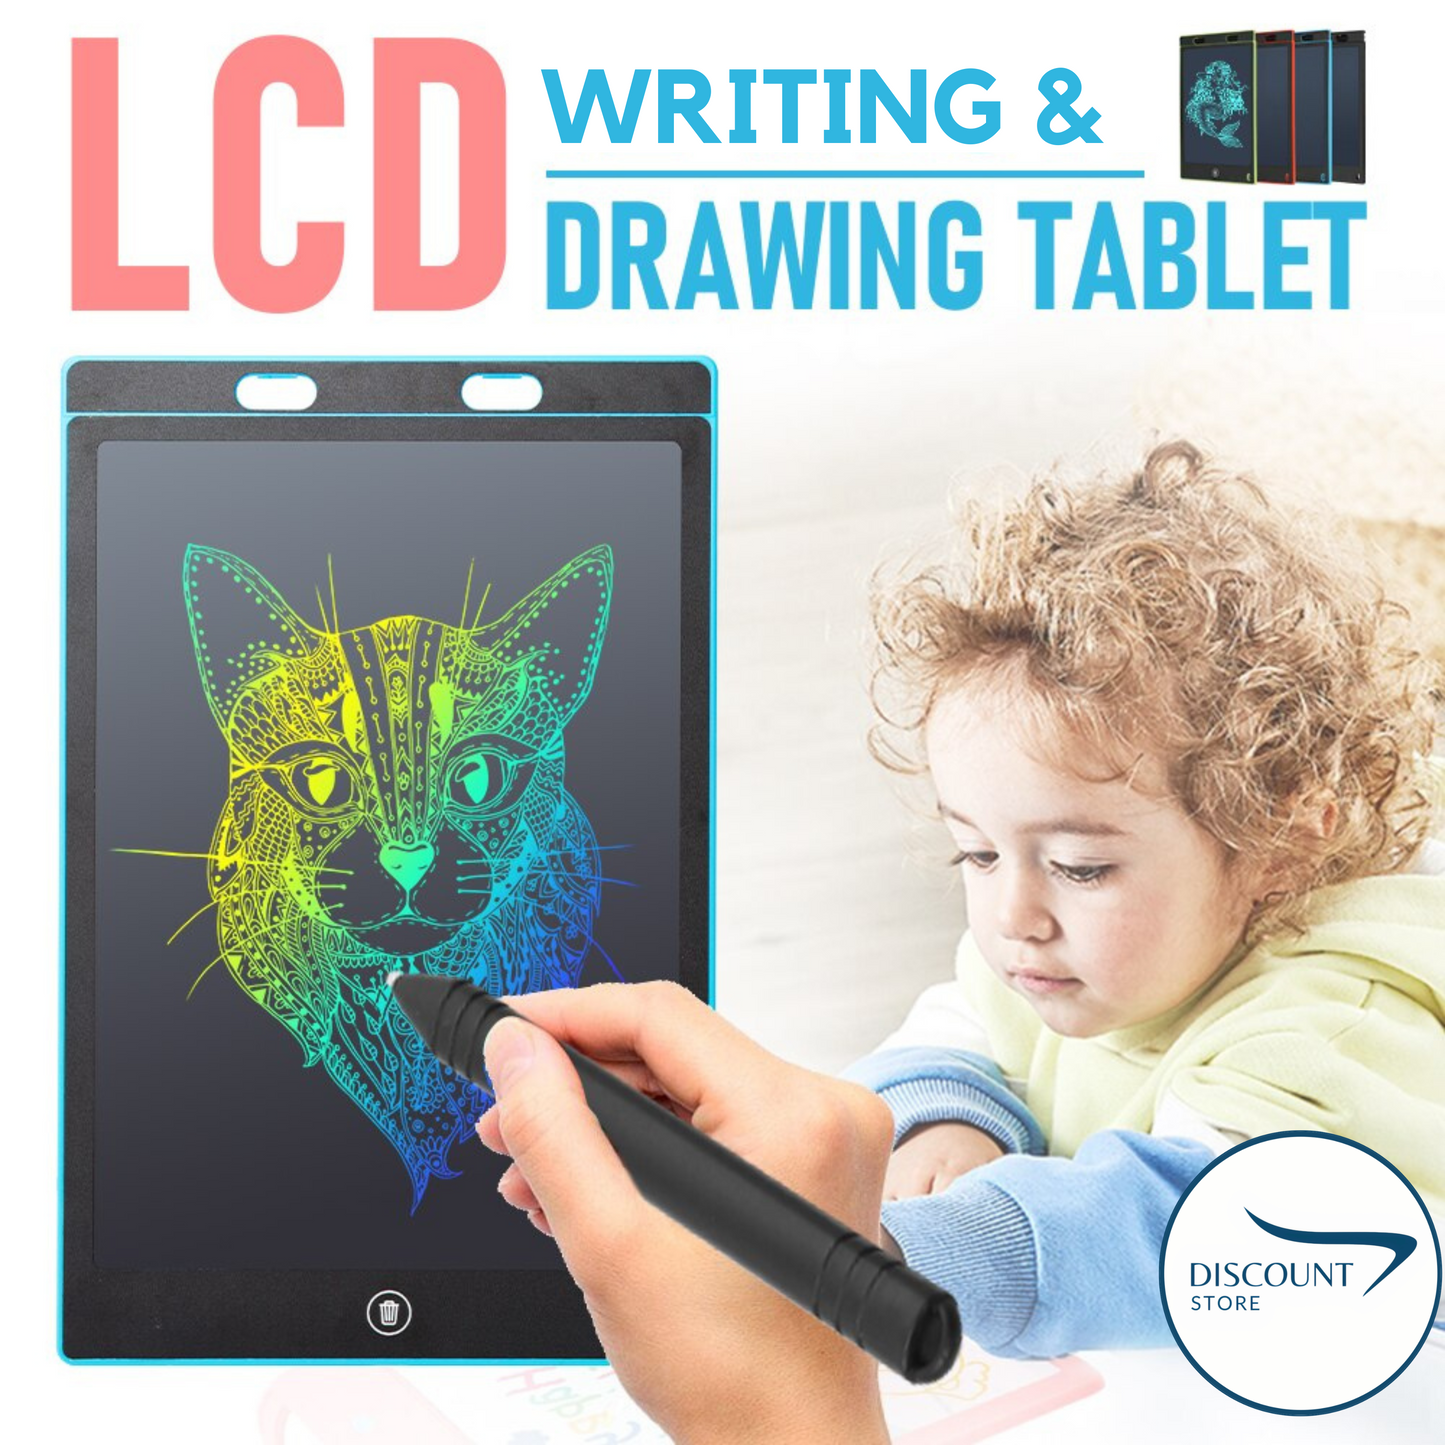 LCD Writing & Drawing Tablet Pad For Kids with Digital Pen - 8.5 inches